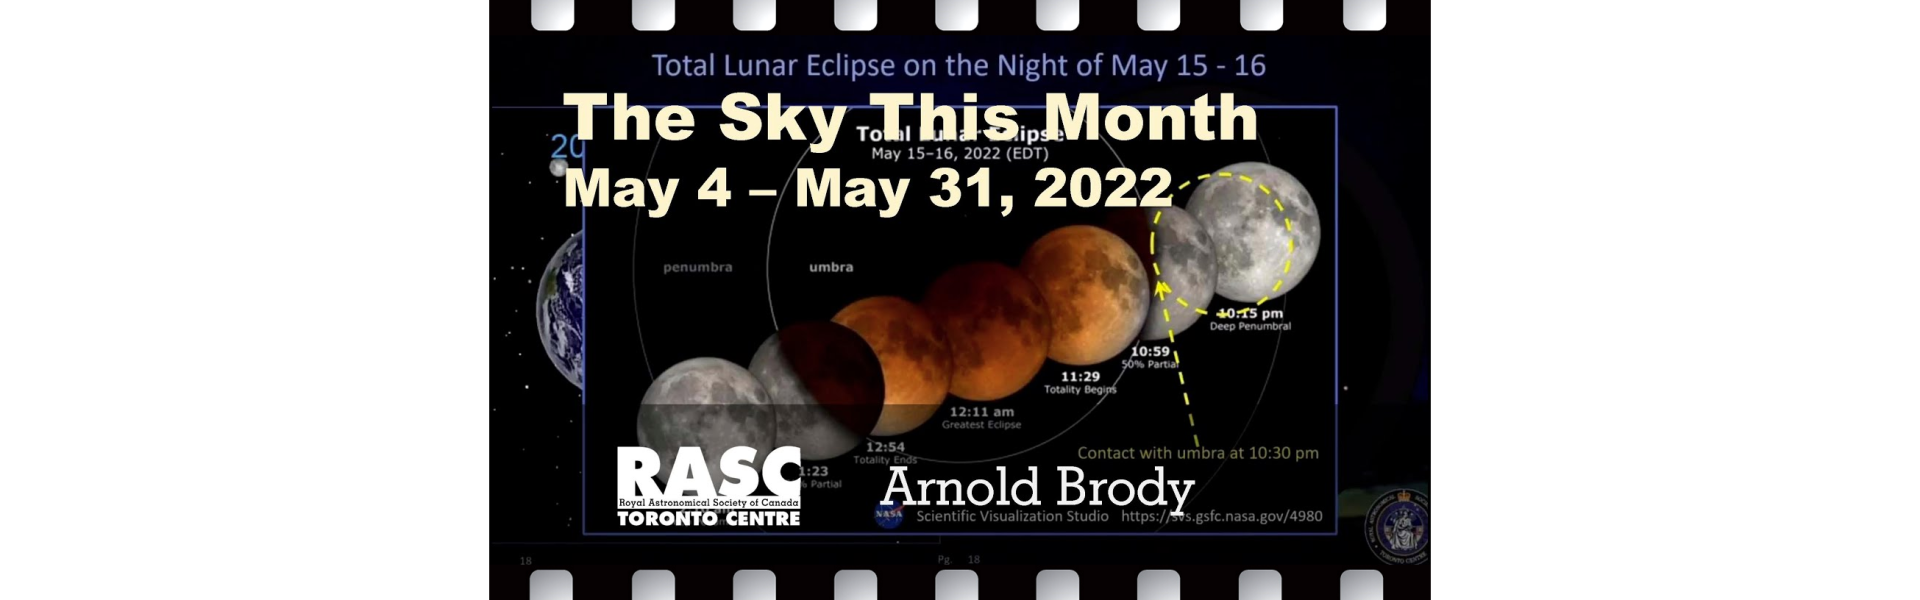 The Sky This Month, May 4 - May 31, 2022